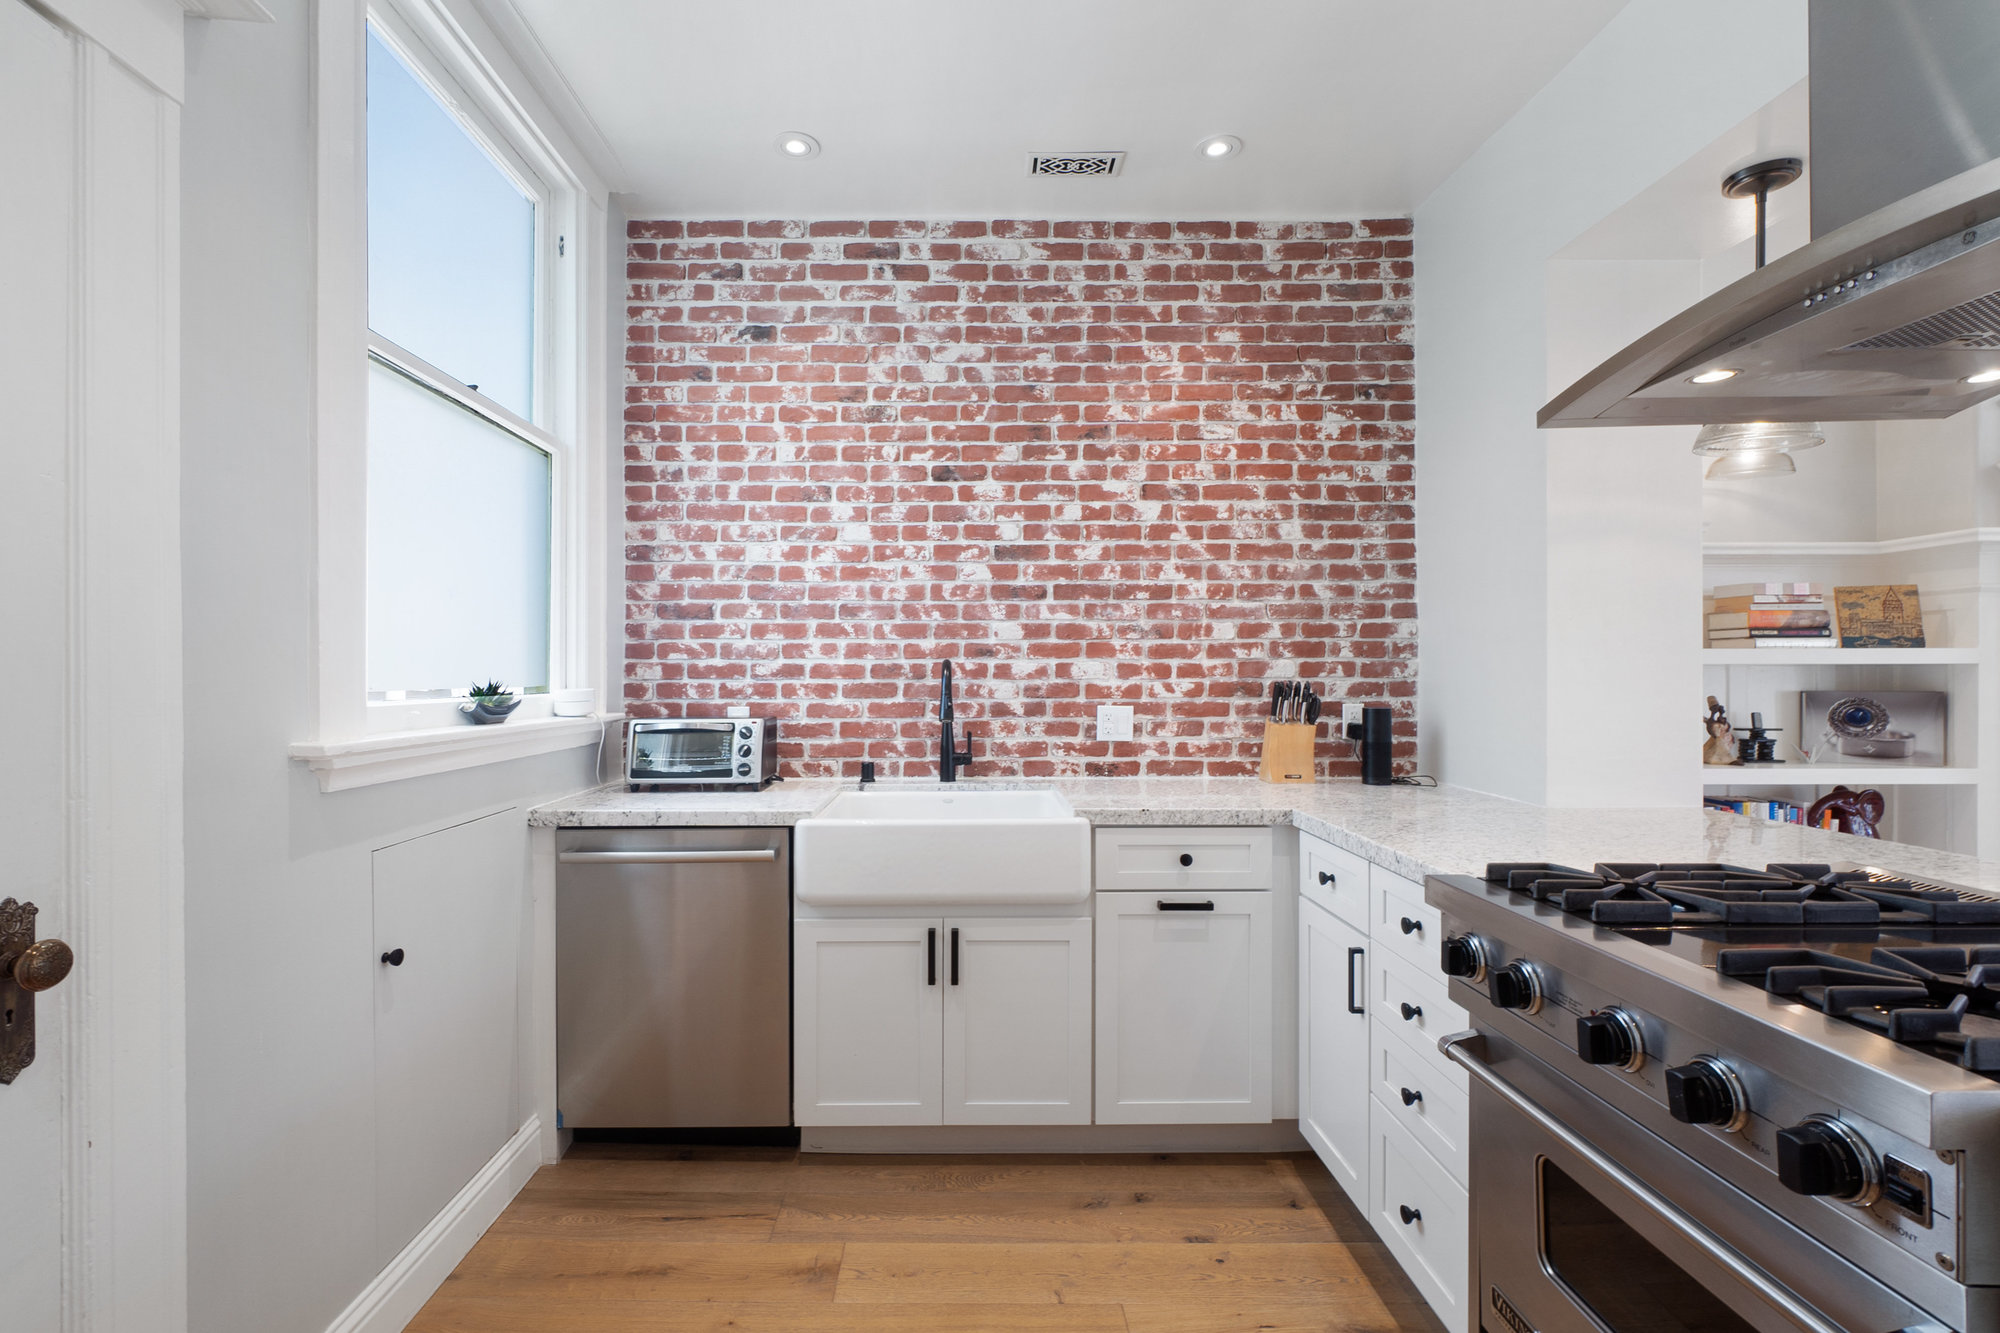 Property Photo: Kitchen with exposed brick wall, showing a farmhouse sink